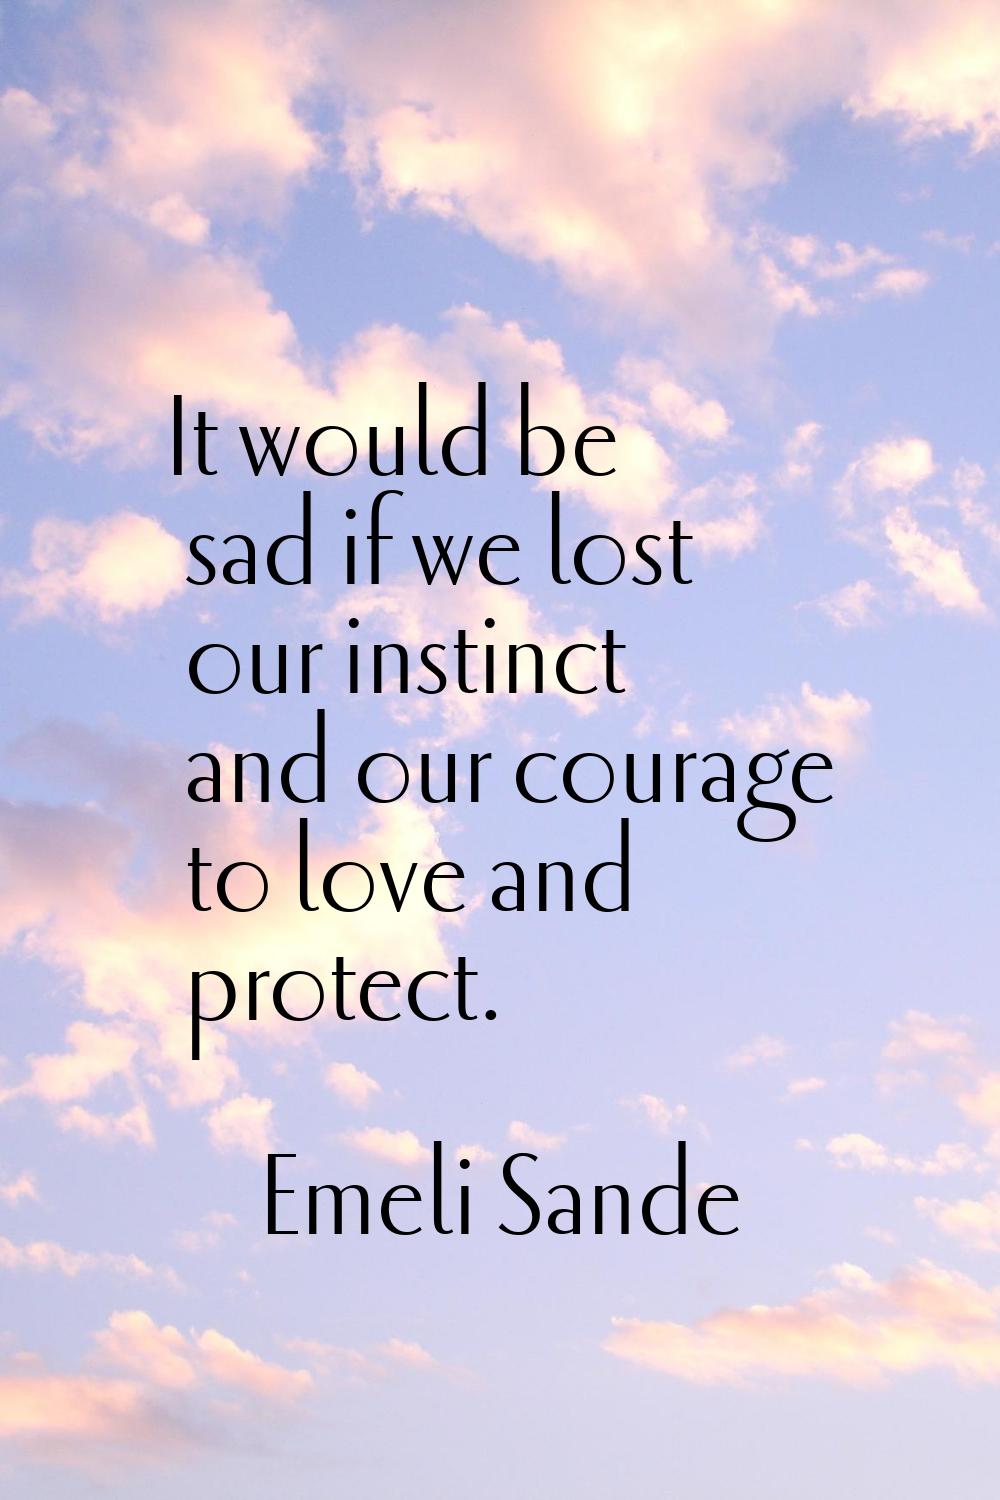 It would be sad if we lost our instinct and our courage to love and protect.